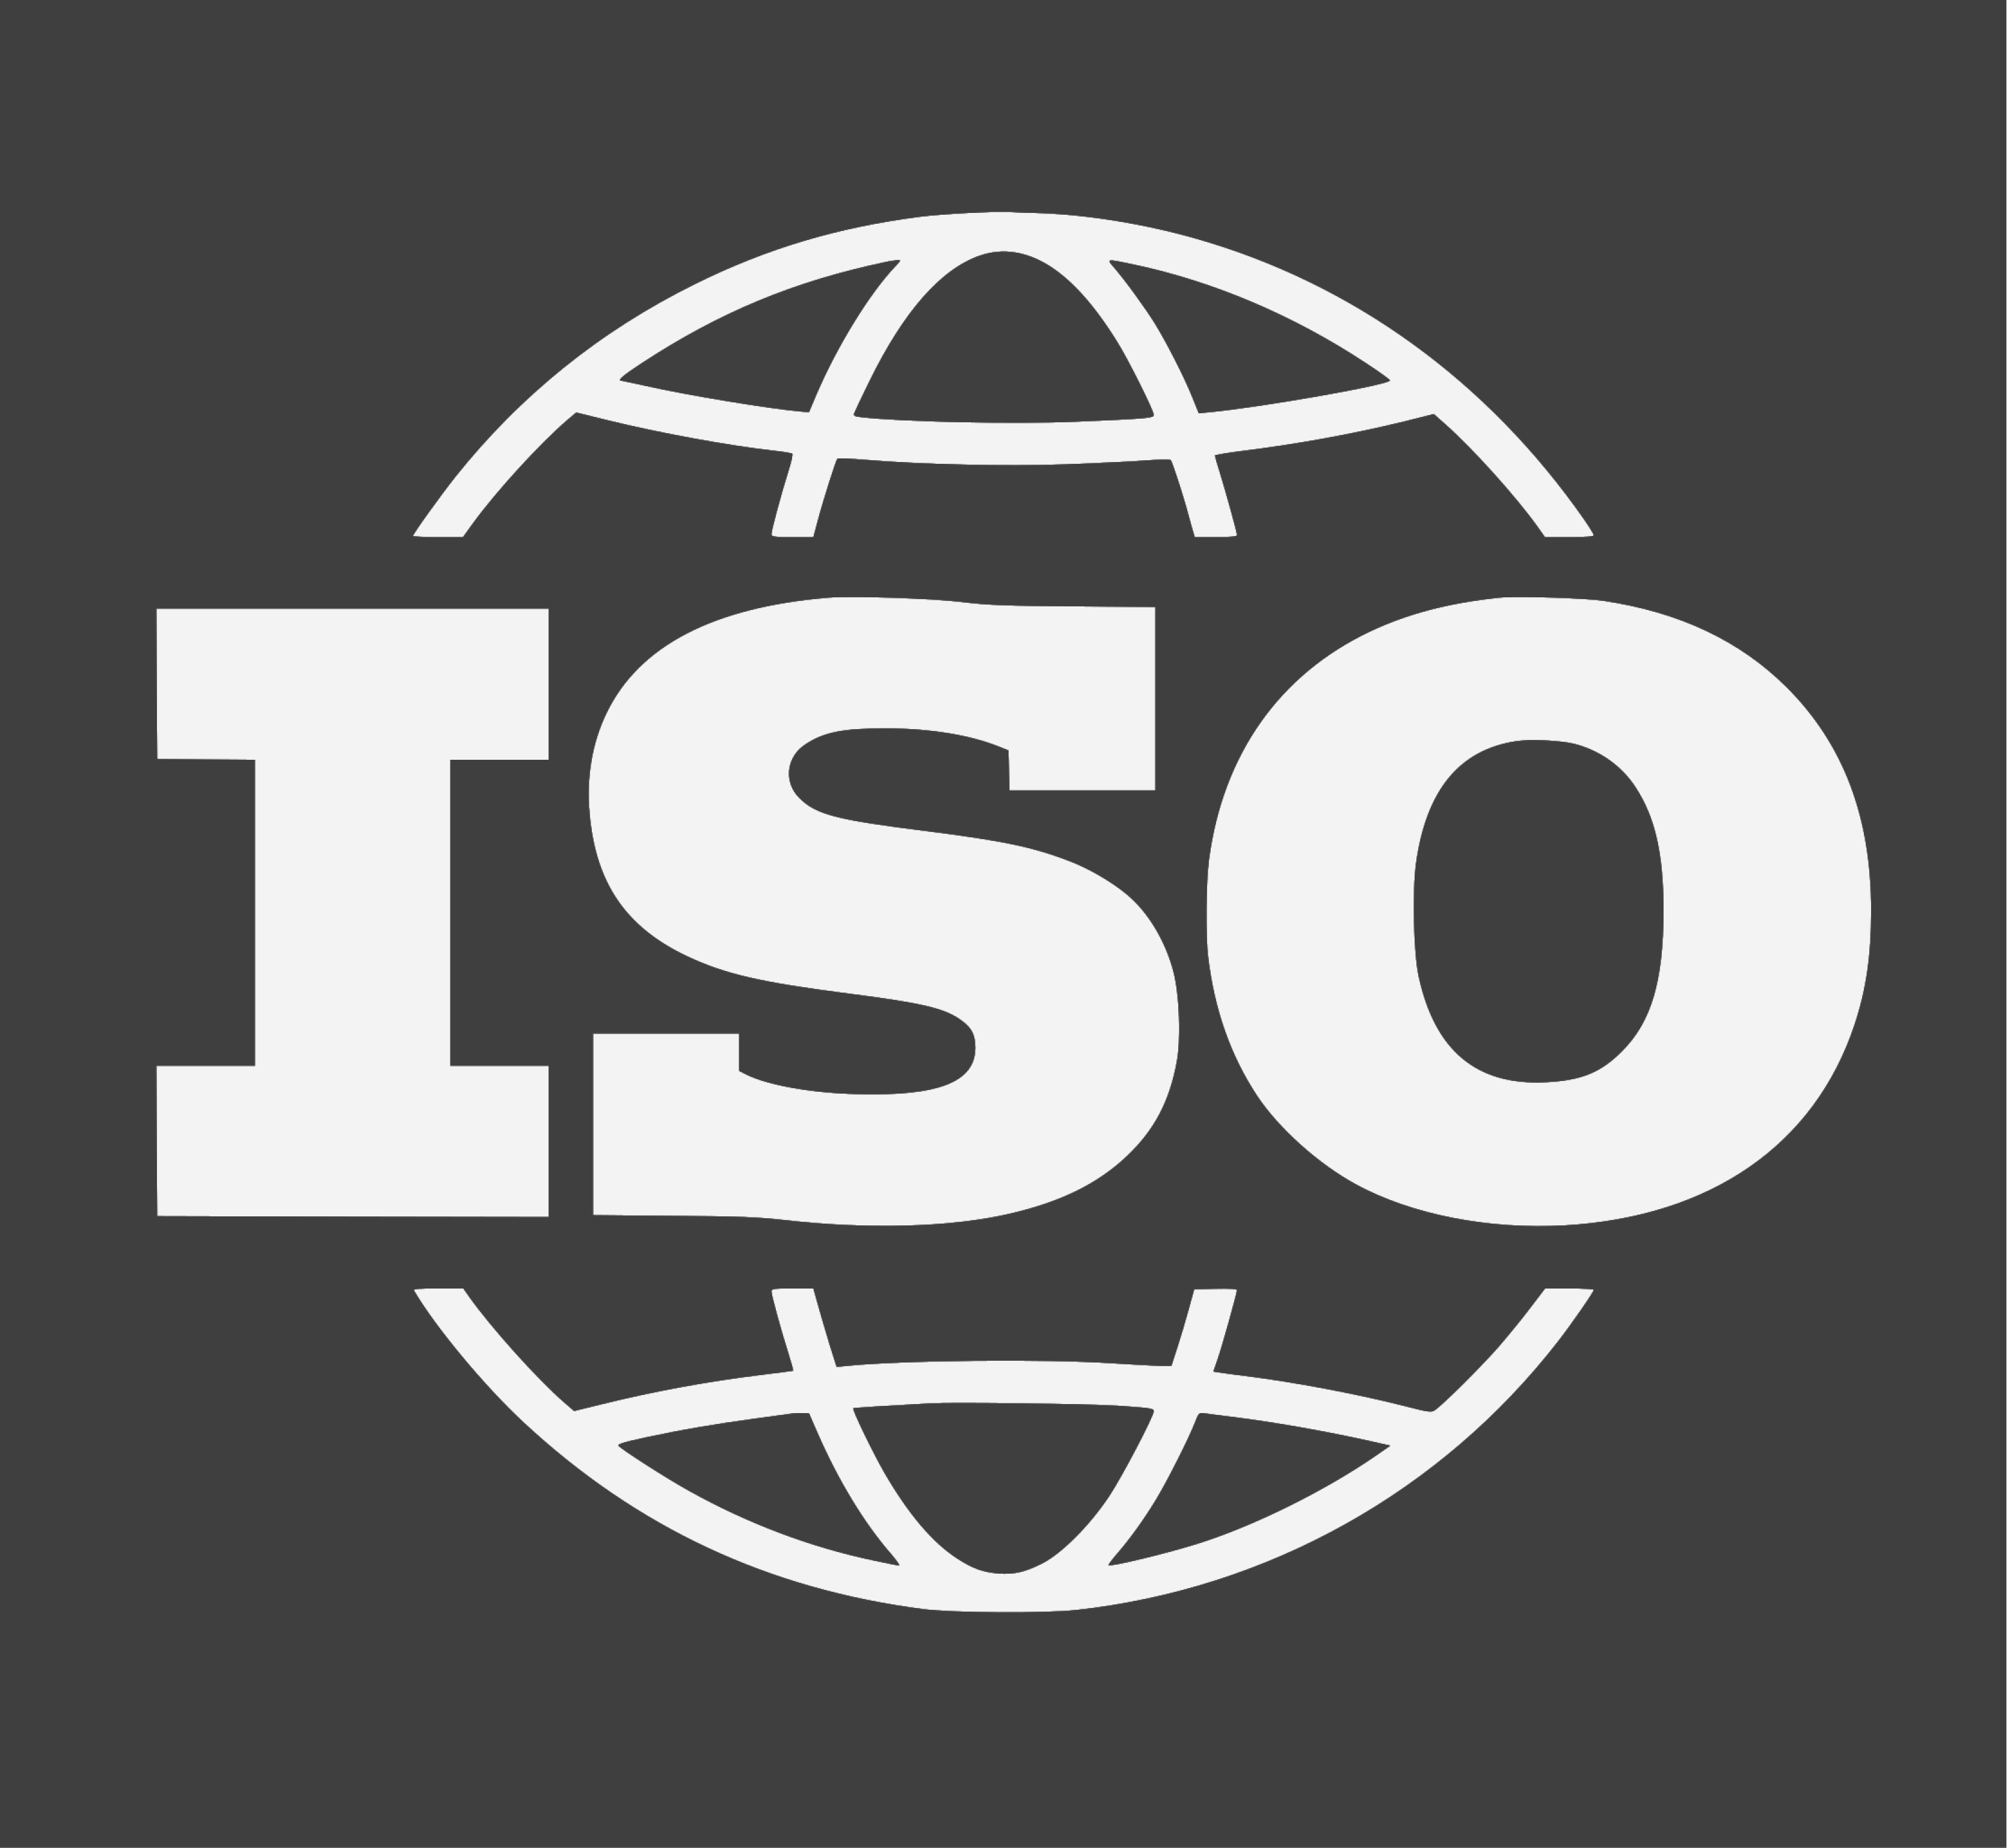 ISO Information Security certification in 2022